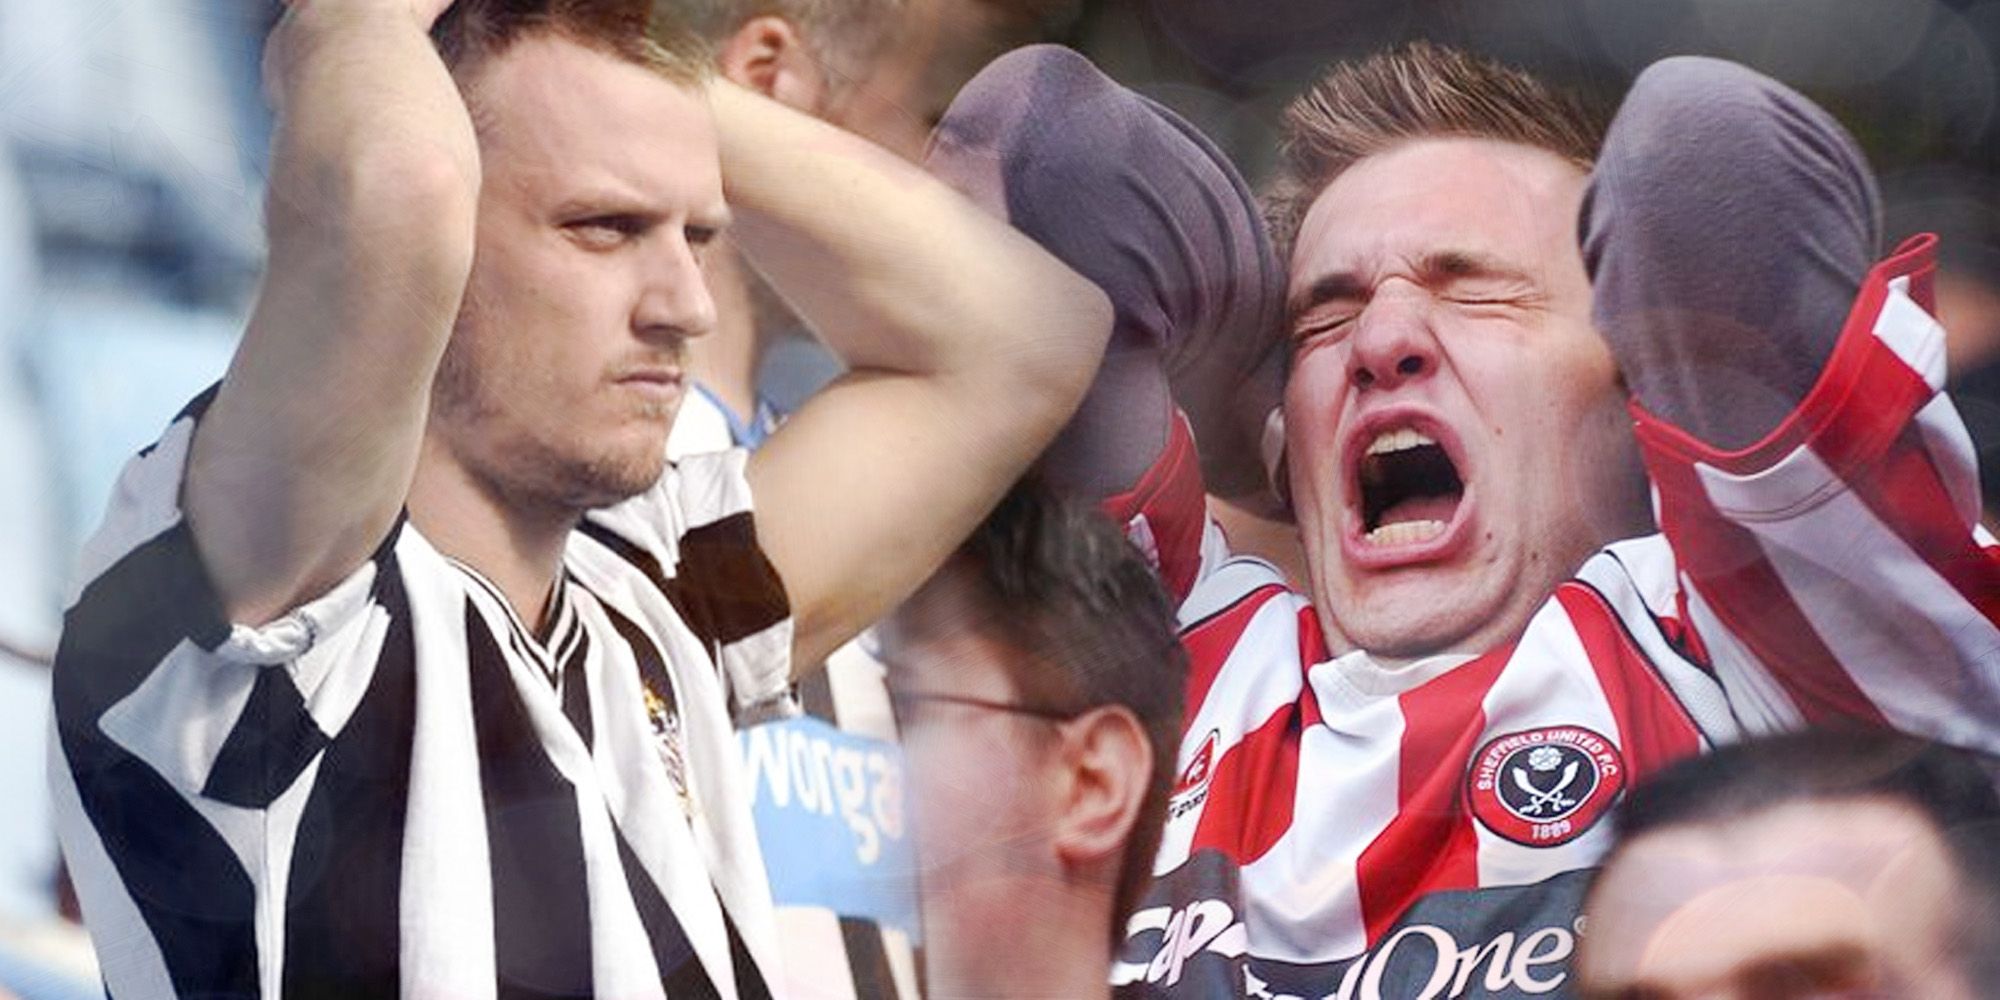 Newcastle United and Sheffield United fans reacting to their teams being relegated from the Premier League.